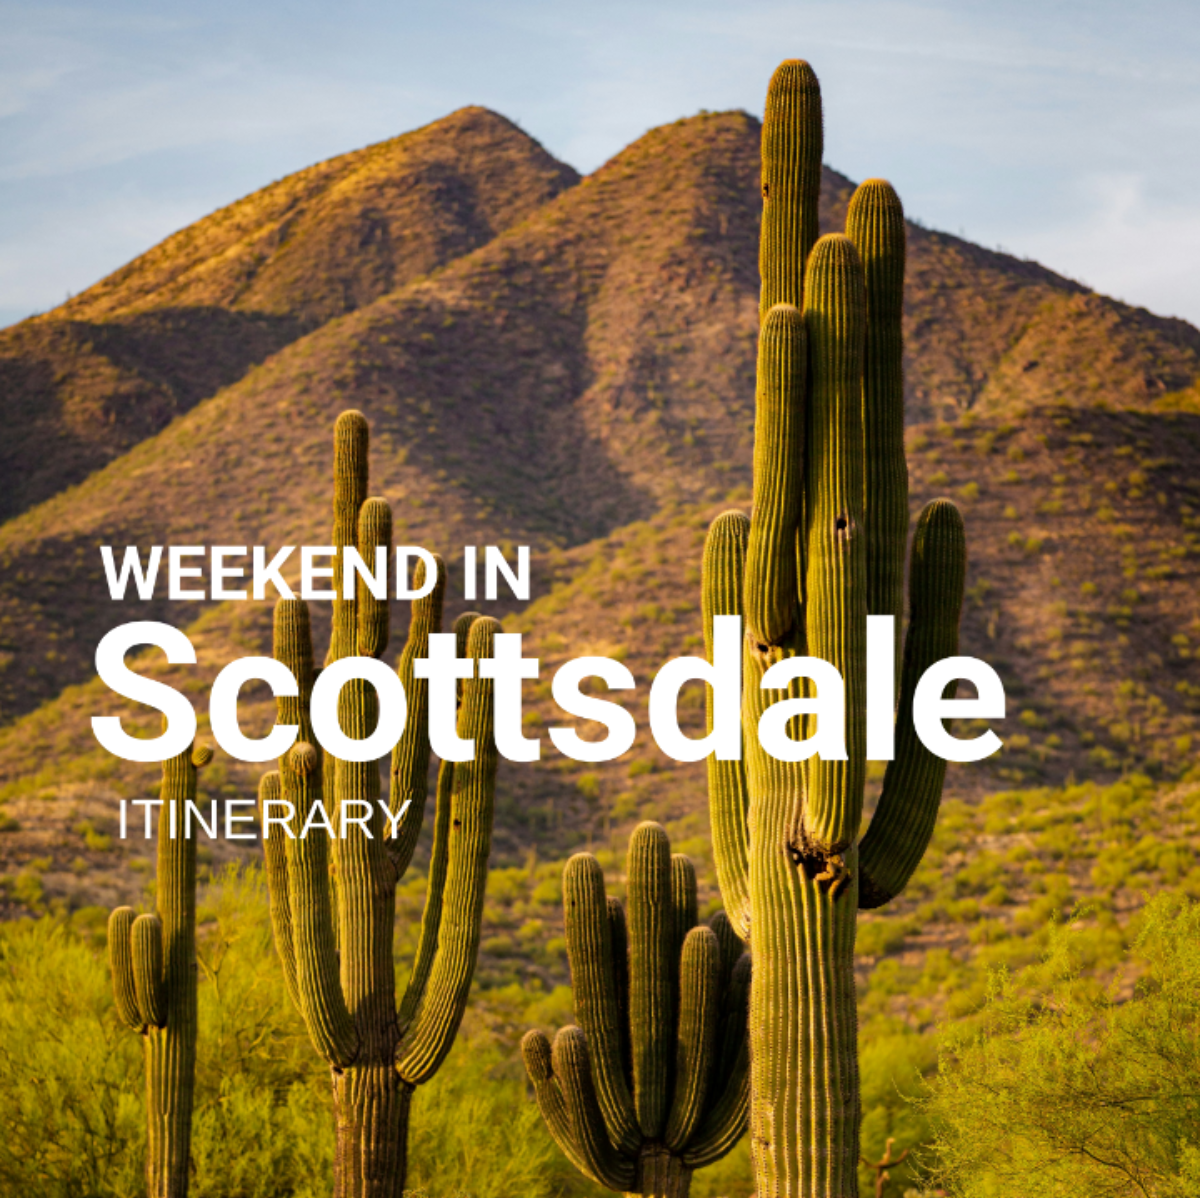 A Weekend in Scottsdale  Itinerary + What to do in Scottsdale AZ